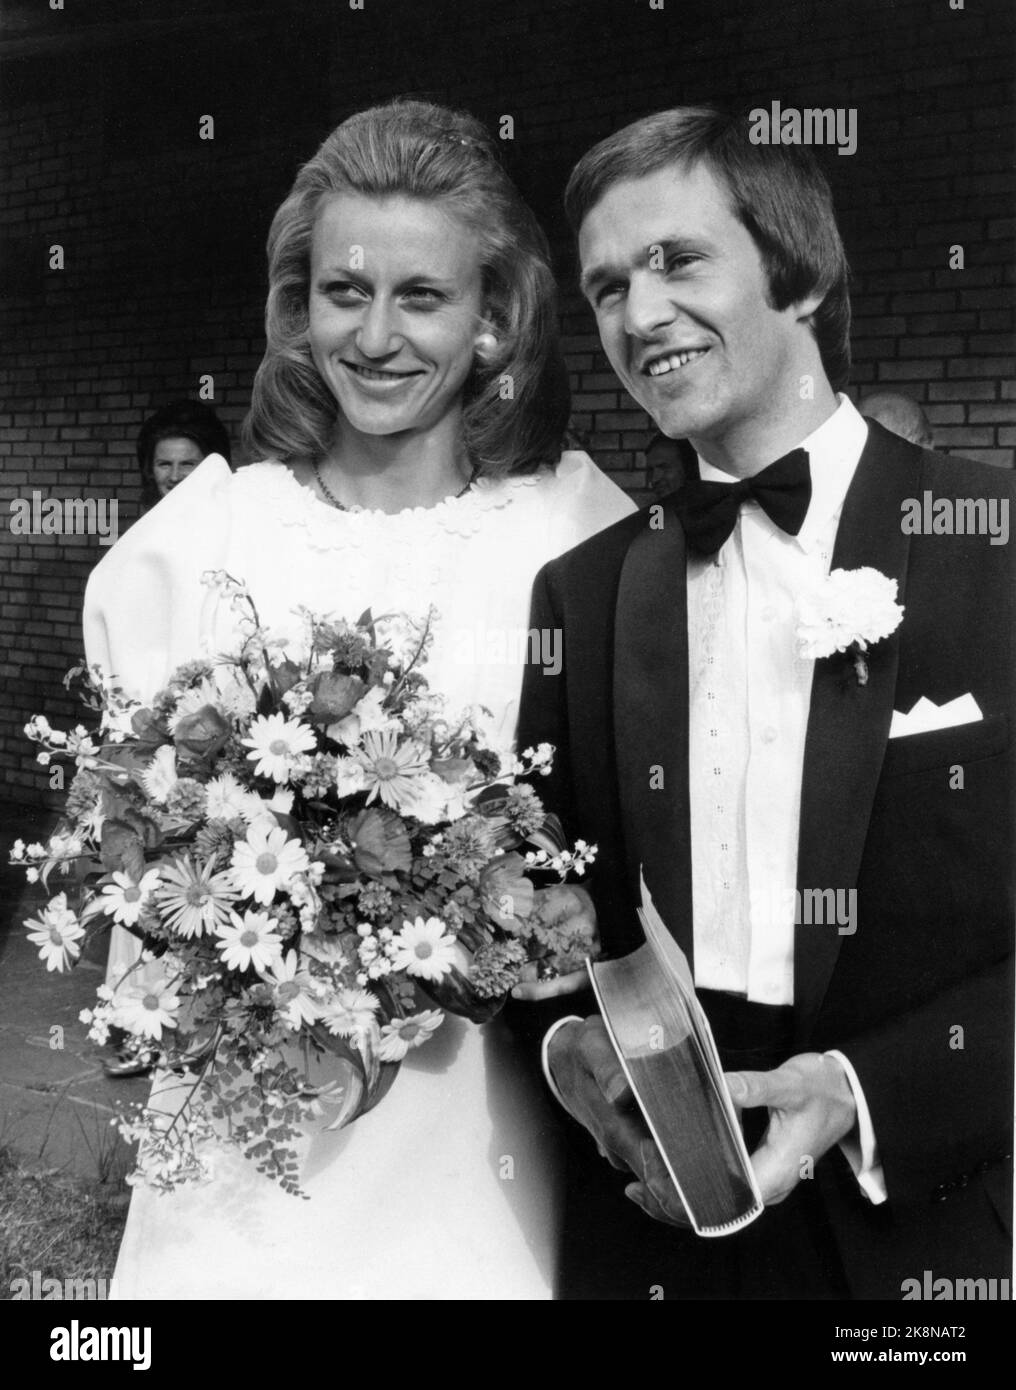 Oslo 19750627: Athlete Grete Andersen marries Jack Waitz and becomes Grete Waitz. Here the bridal couple after the wedding. Photo: NTB / NTB Stock Photo